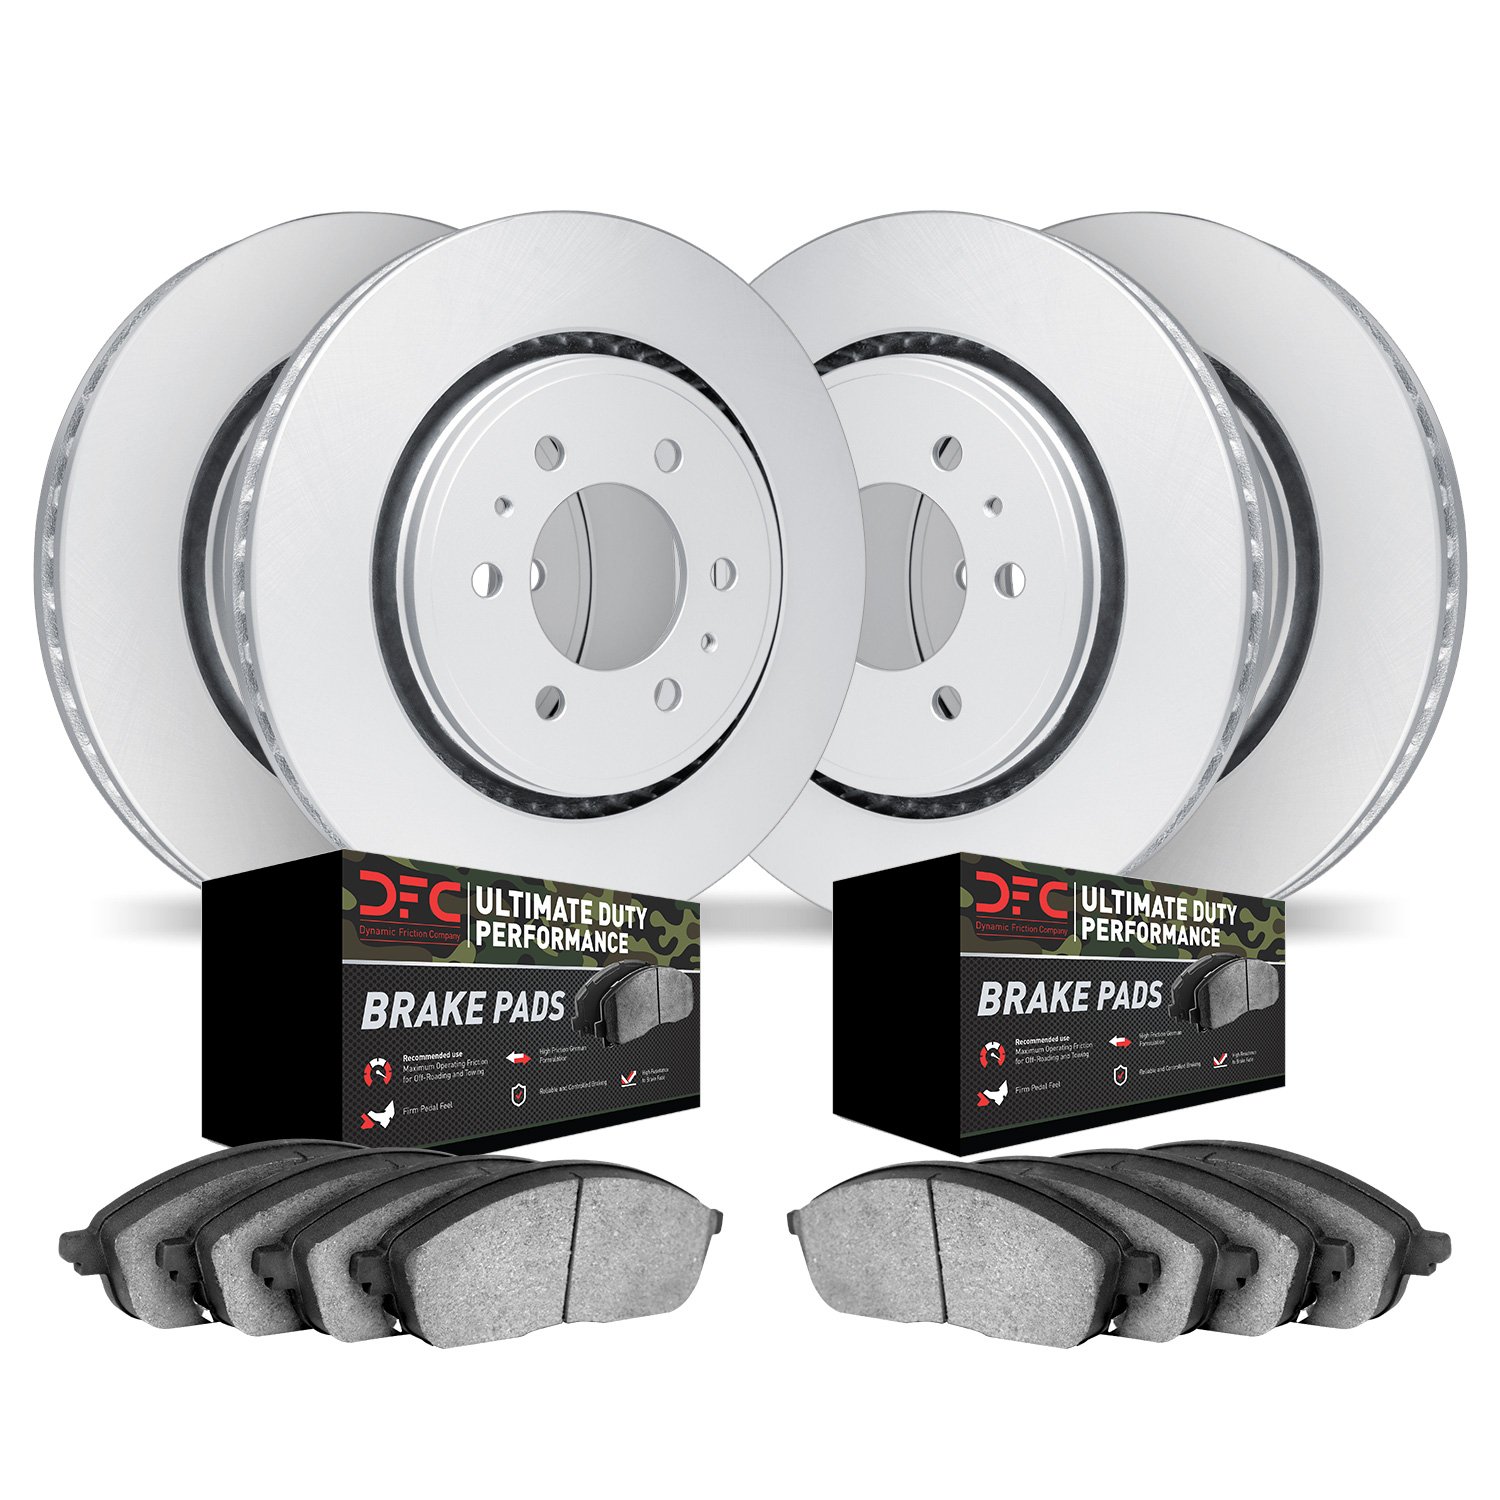 4404-67005 Geospec Brake Rotors with Ultimate-Duty Brake Pads Kit, Fits Select Infiniti/Nissan, Position: Front and Rear